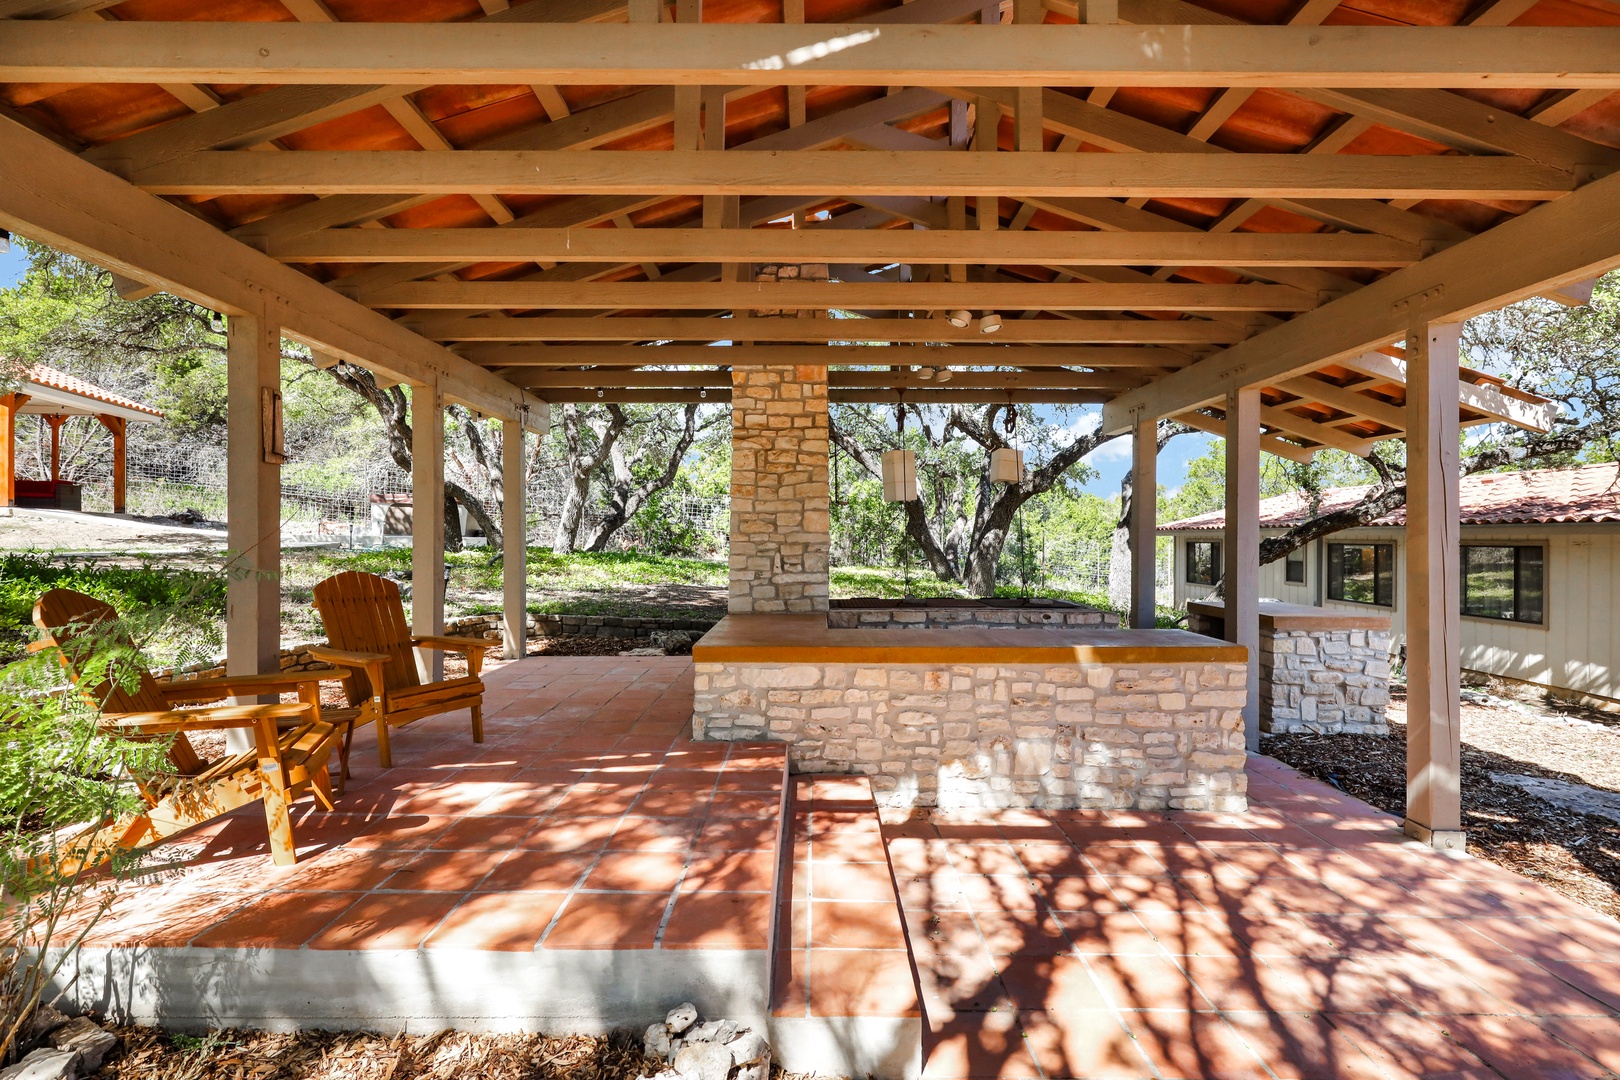 This exceptional property offers abundant outdoor options for relaxation & fun